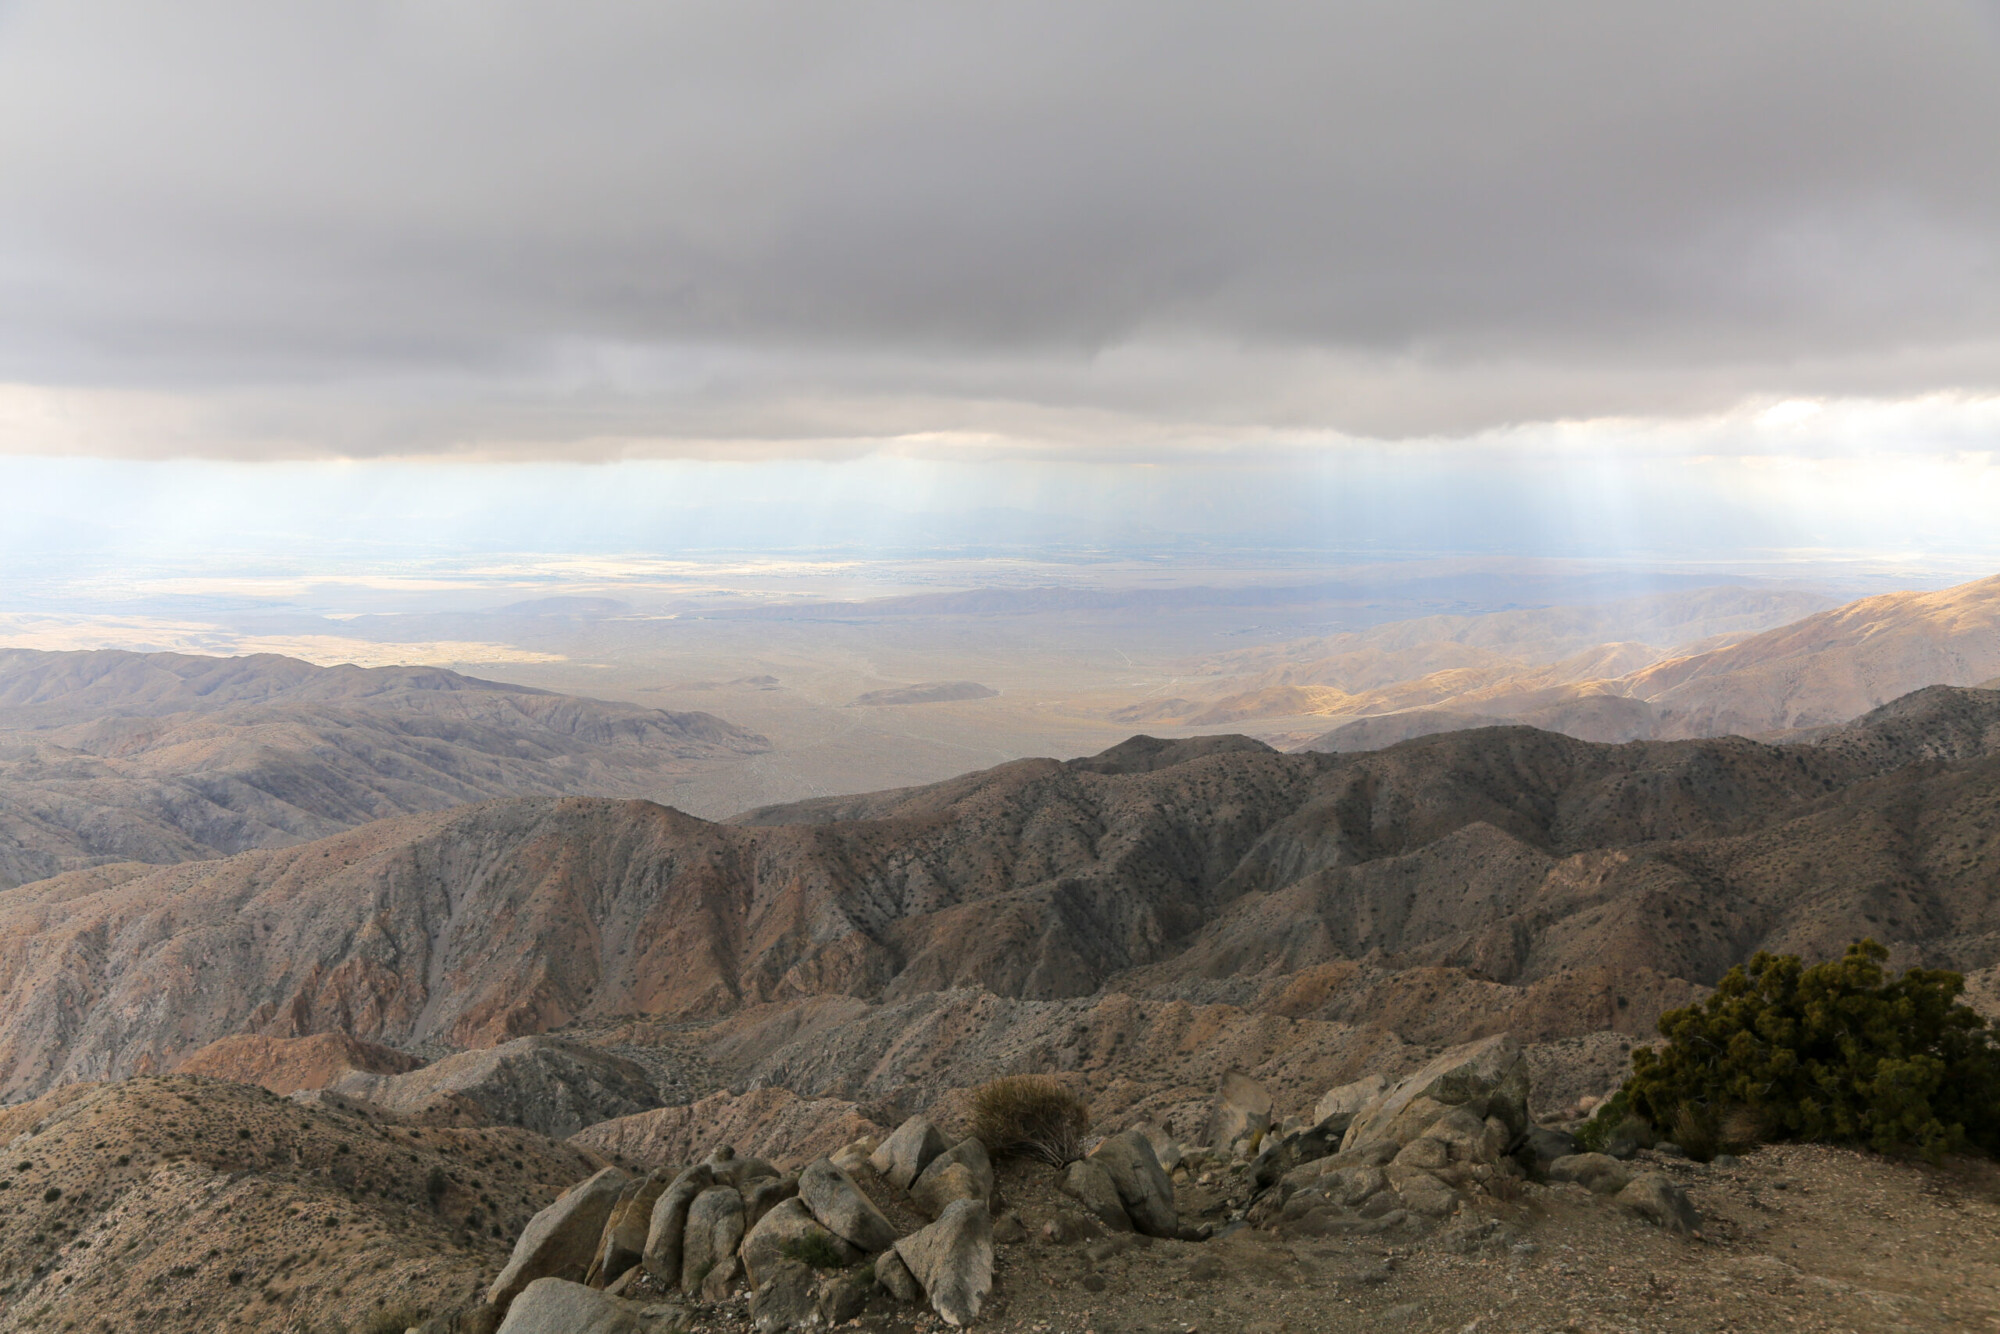 View of Coachella Valley from Key's View in Joshua Tree National Park, California.